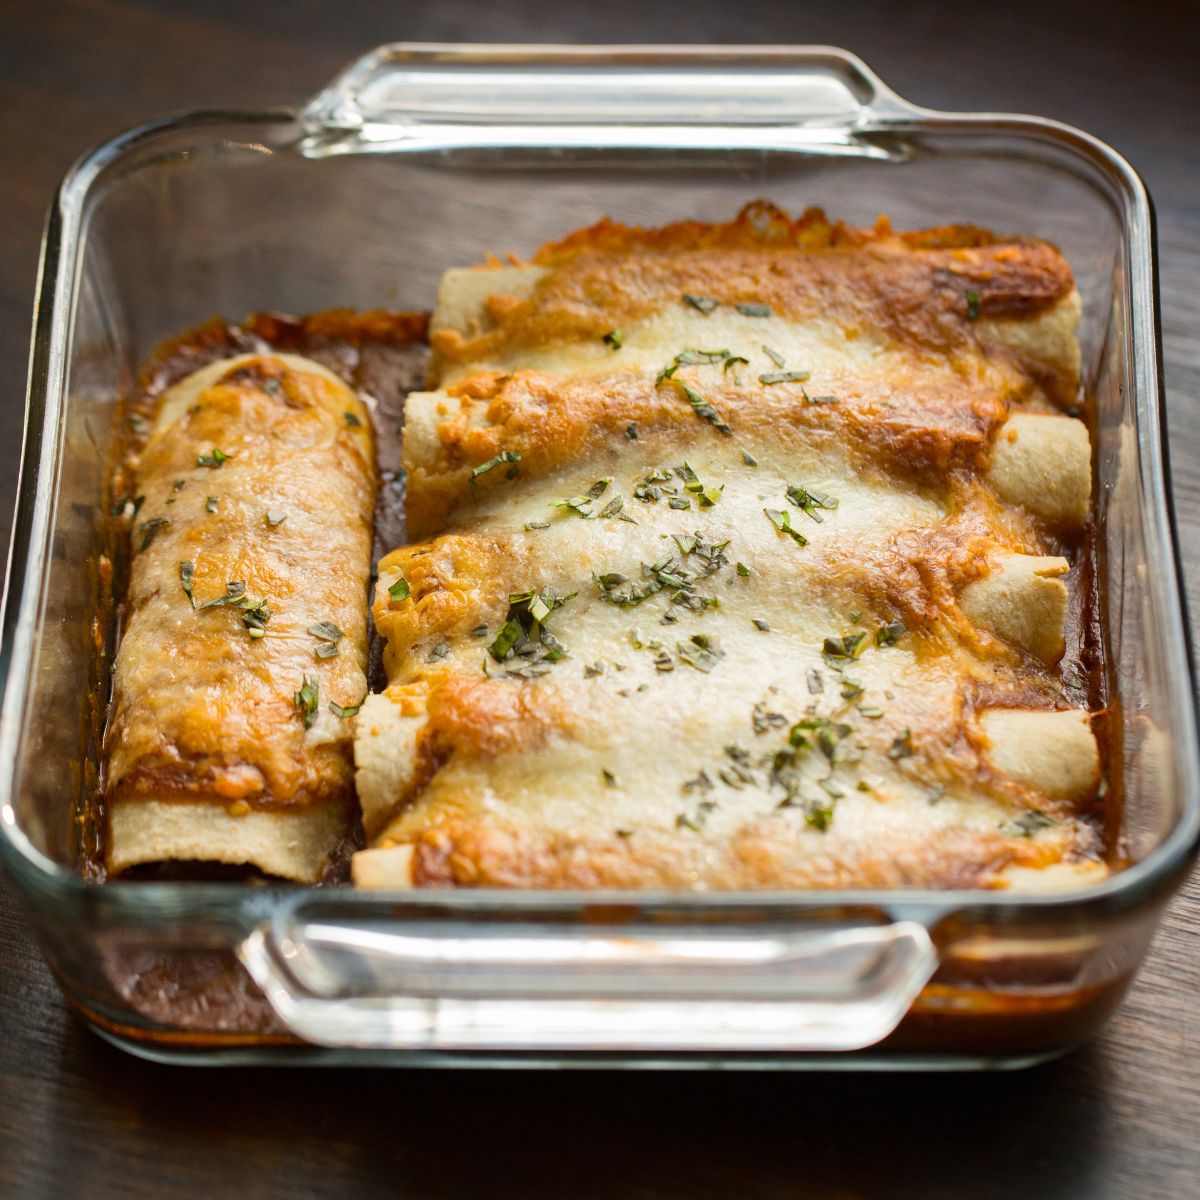 Enchiladas in a glass dish with golden cheese melting on top